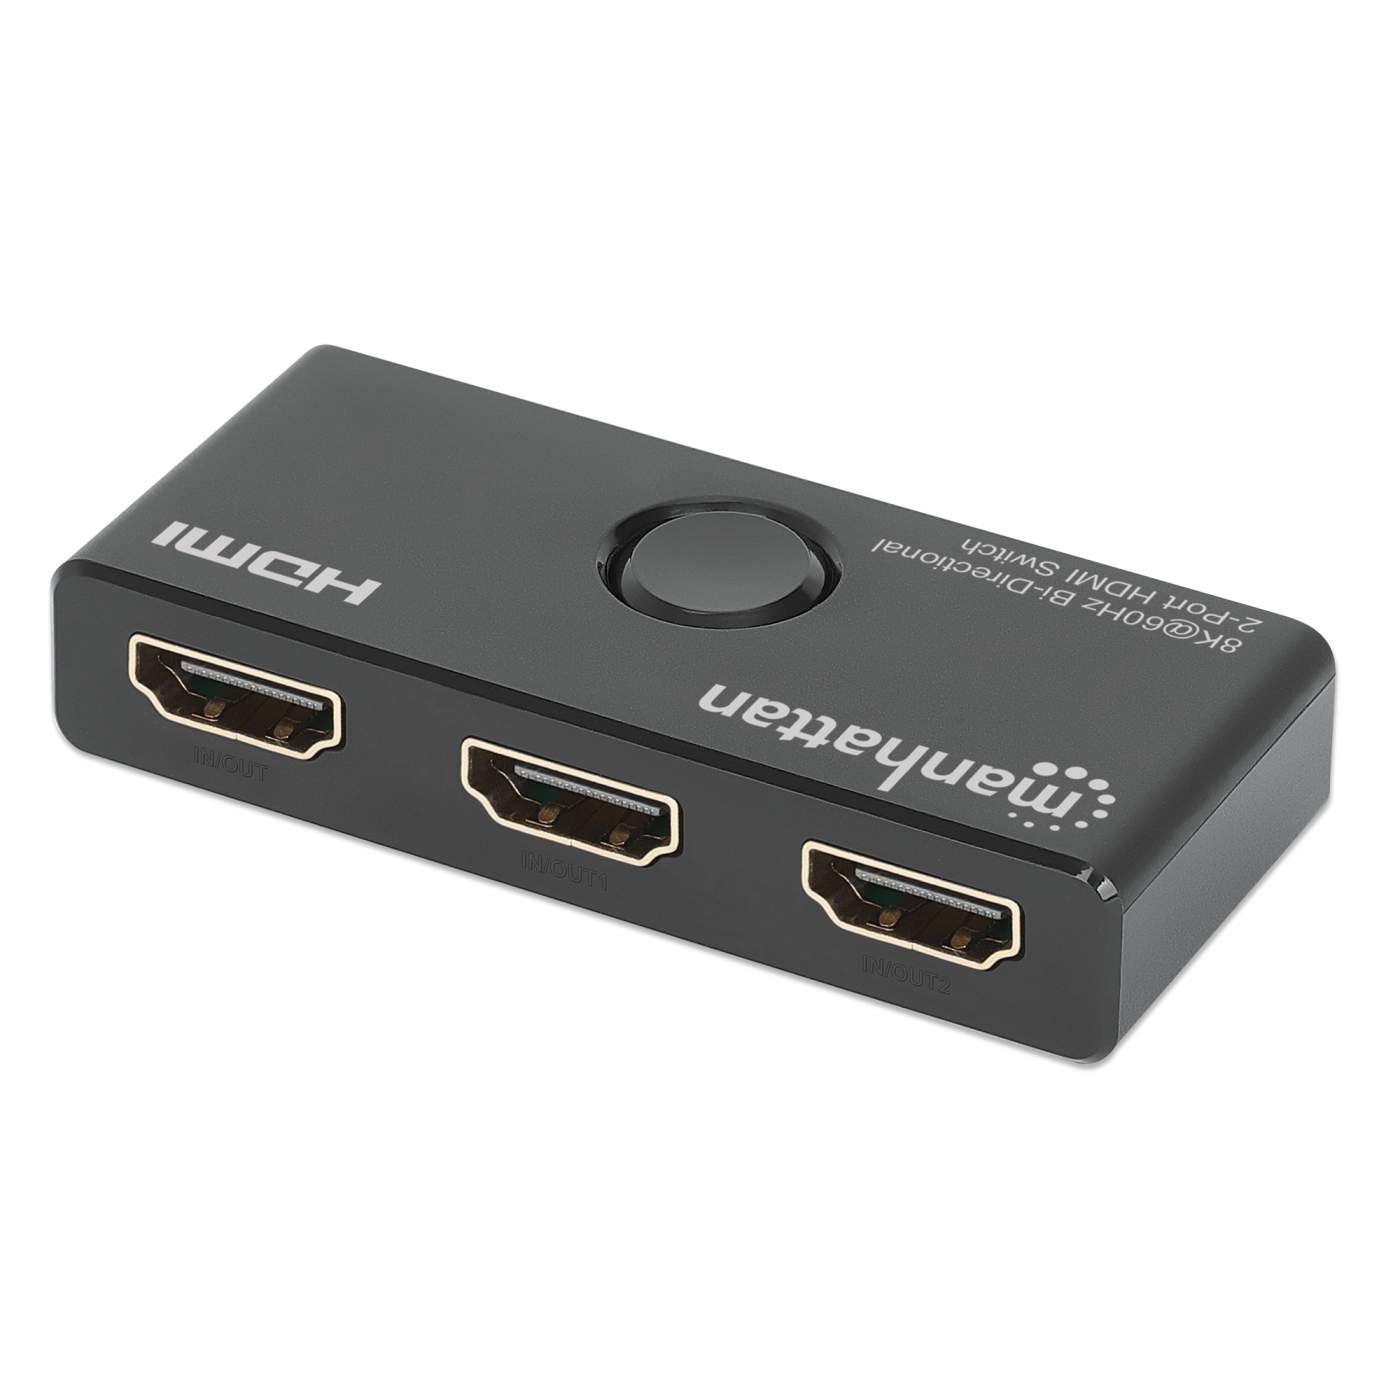 Micro USB to HDMI MHL Adapter by Monoprice - 1080p Resolution, 7.1